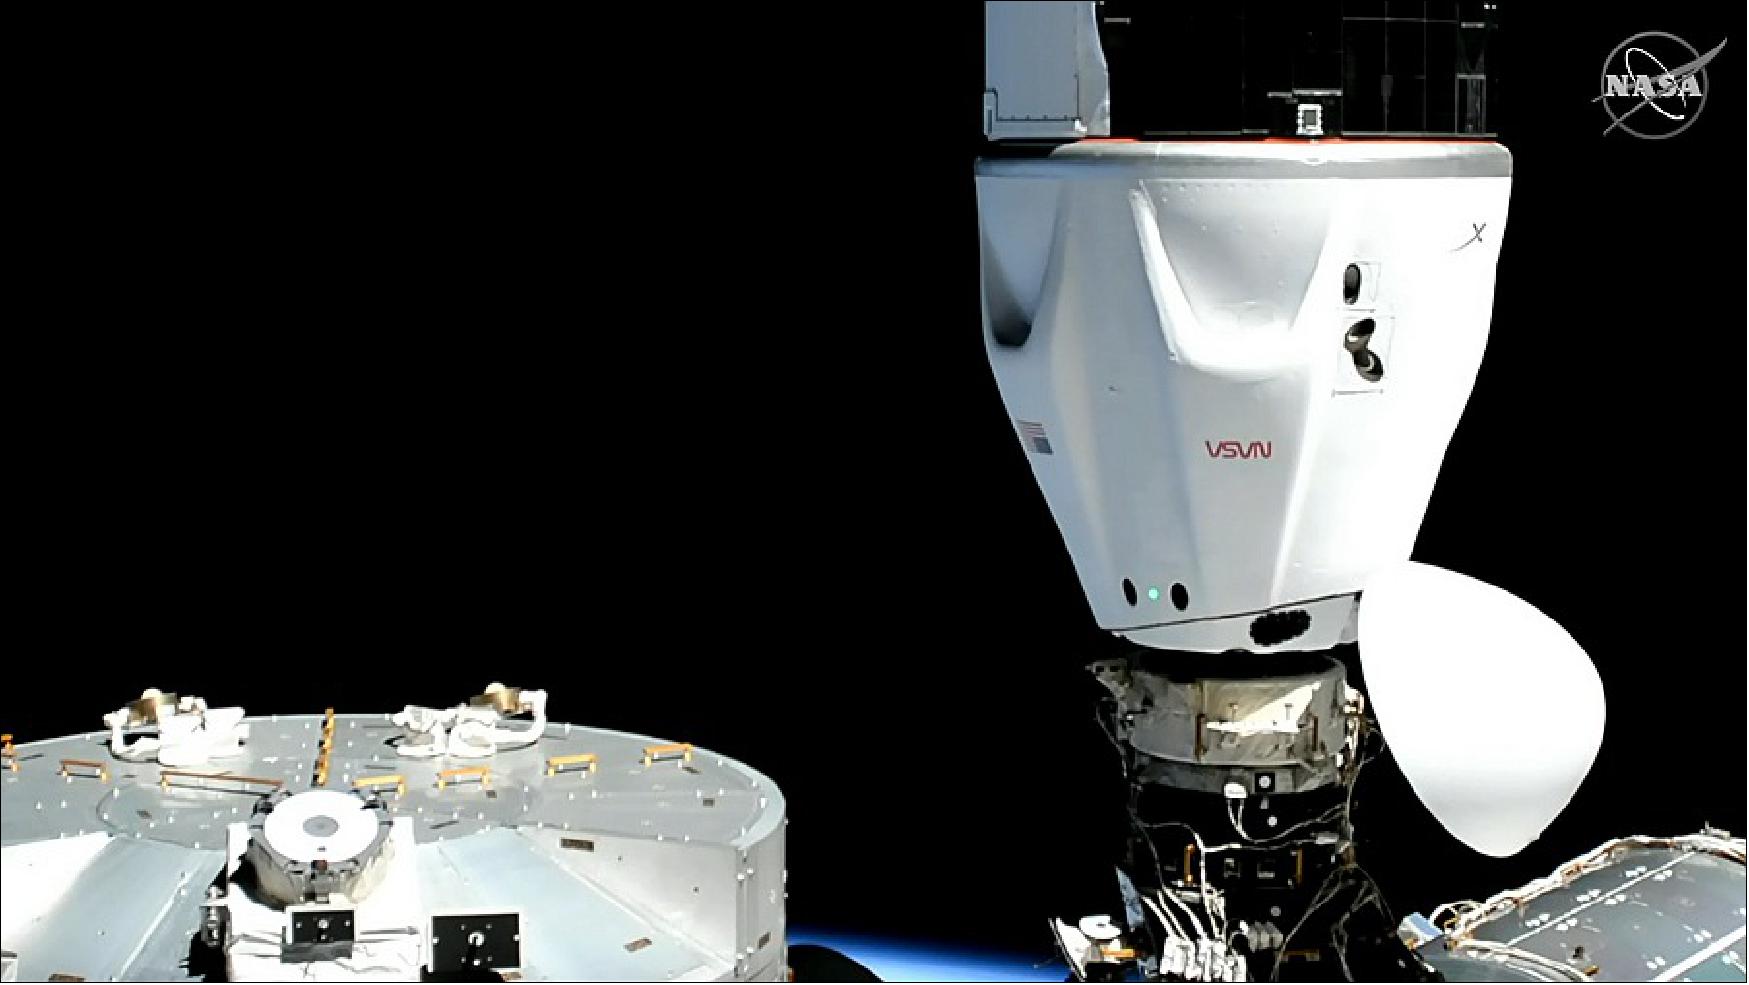 Figure 25: The SpaceX Dragon Freedom capsule is seen after docking to the International Space Station while the station was orbiting 261 statute miles above the Pacific Ocean (image credit: NASA TV)